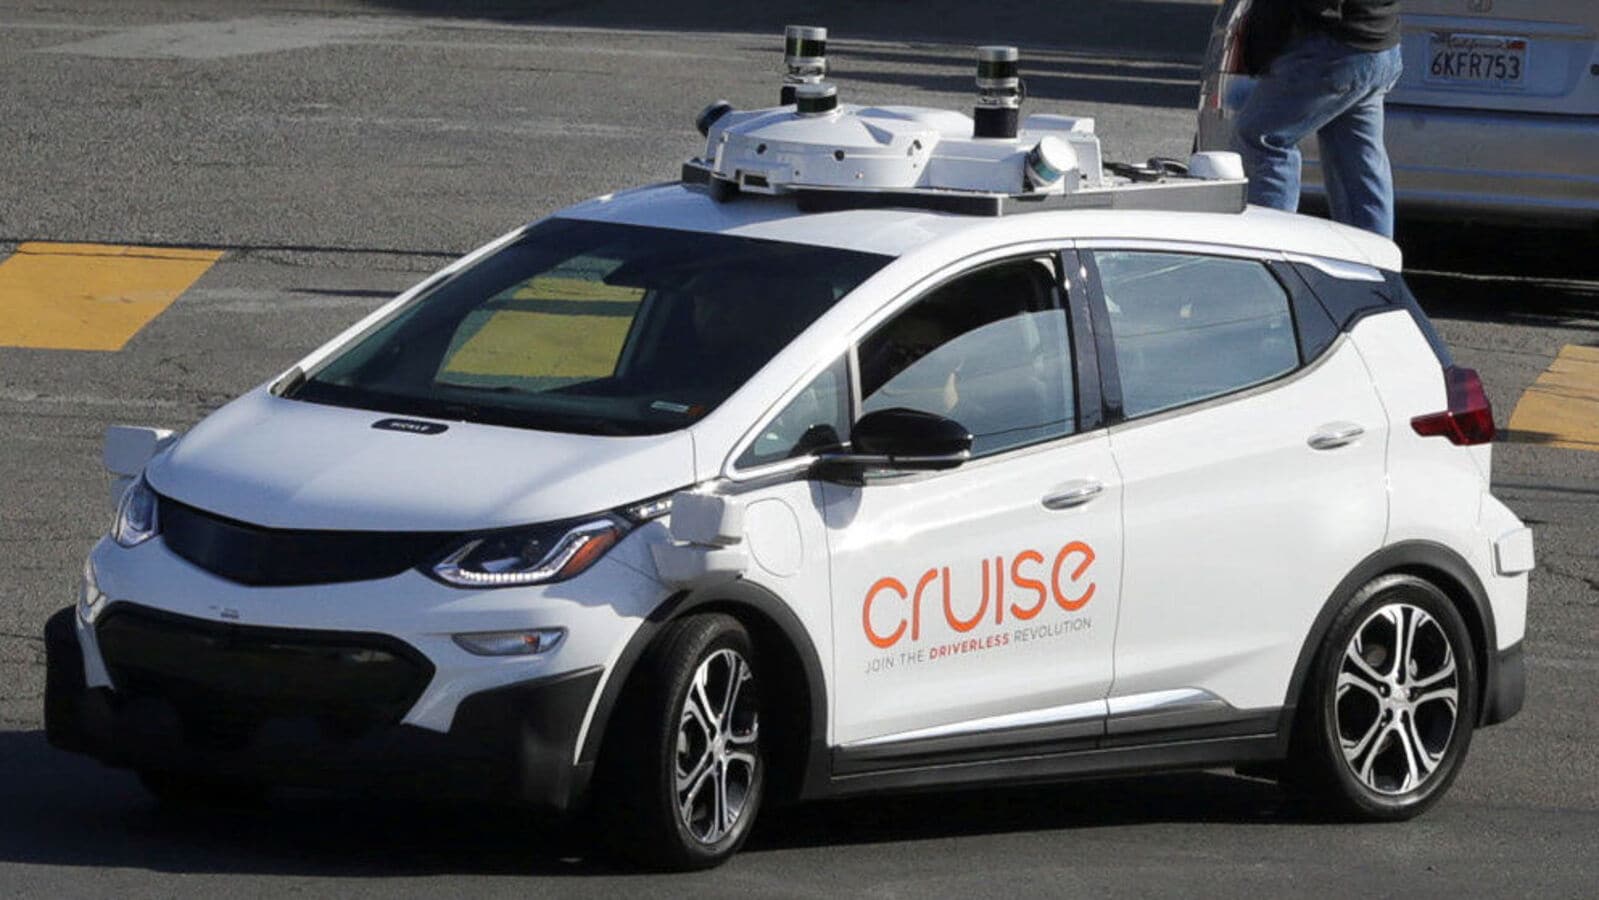 General Motors’ Cruise recalls 80 self-driving vehicles owing to a crash